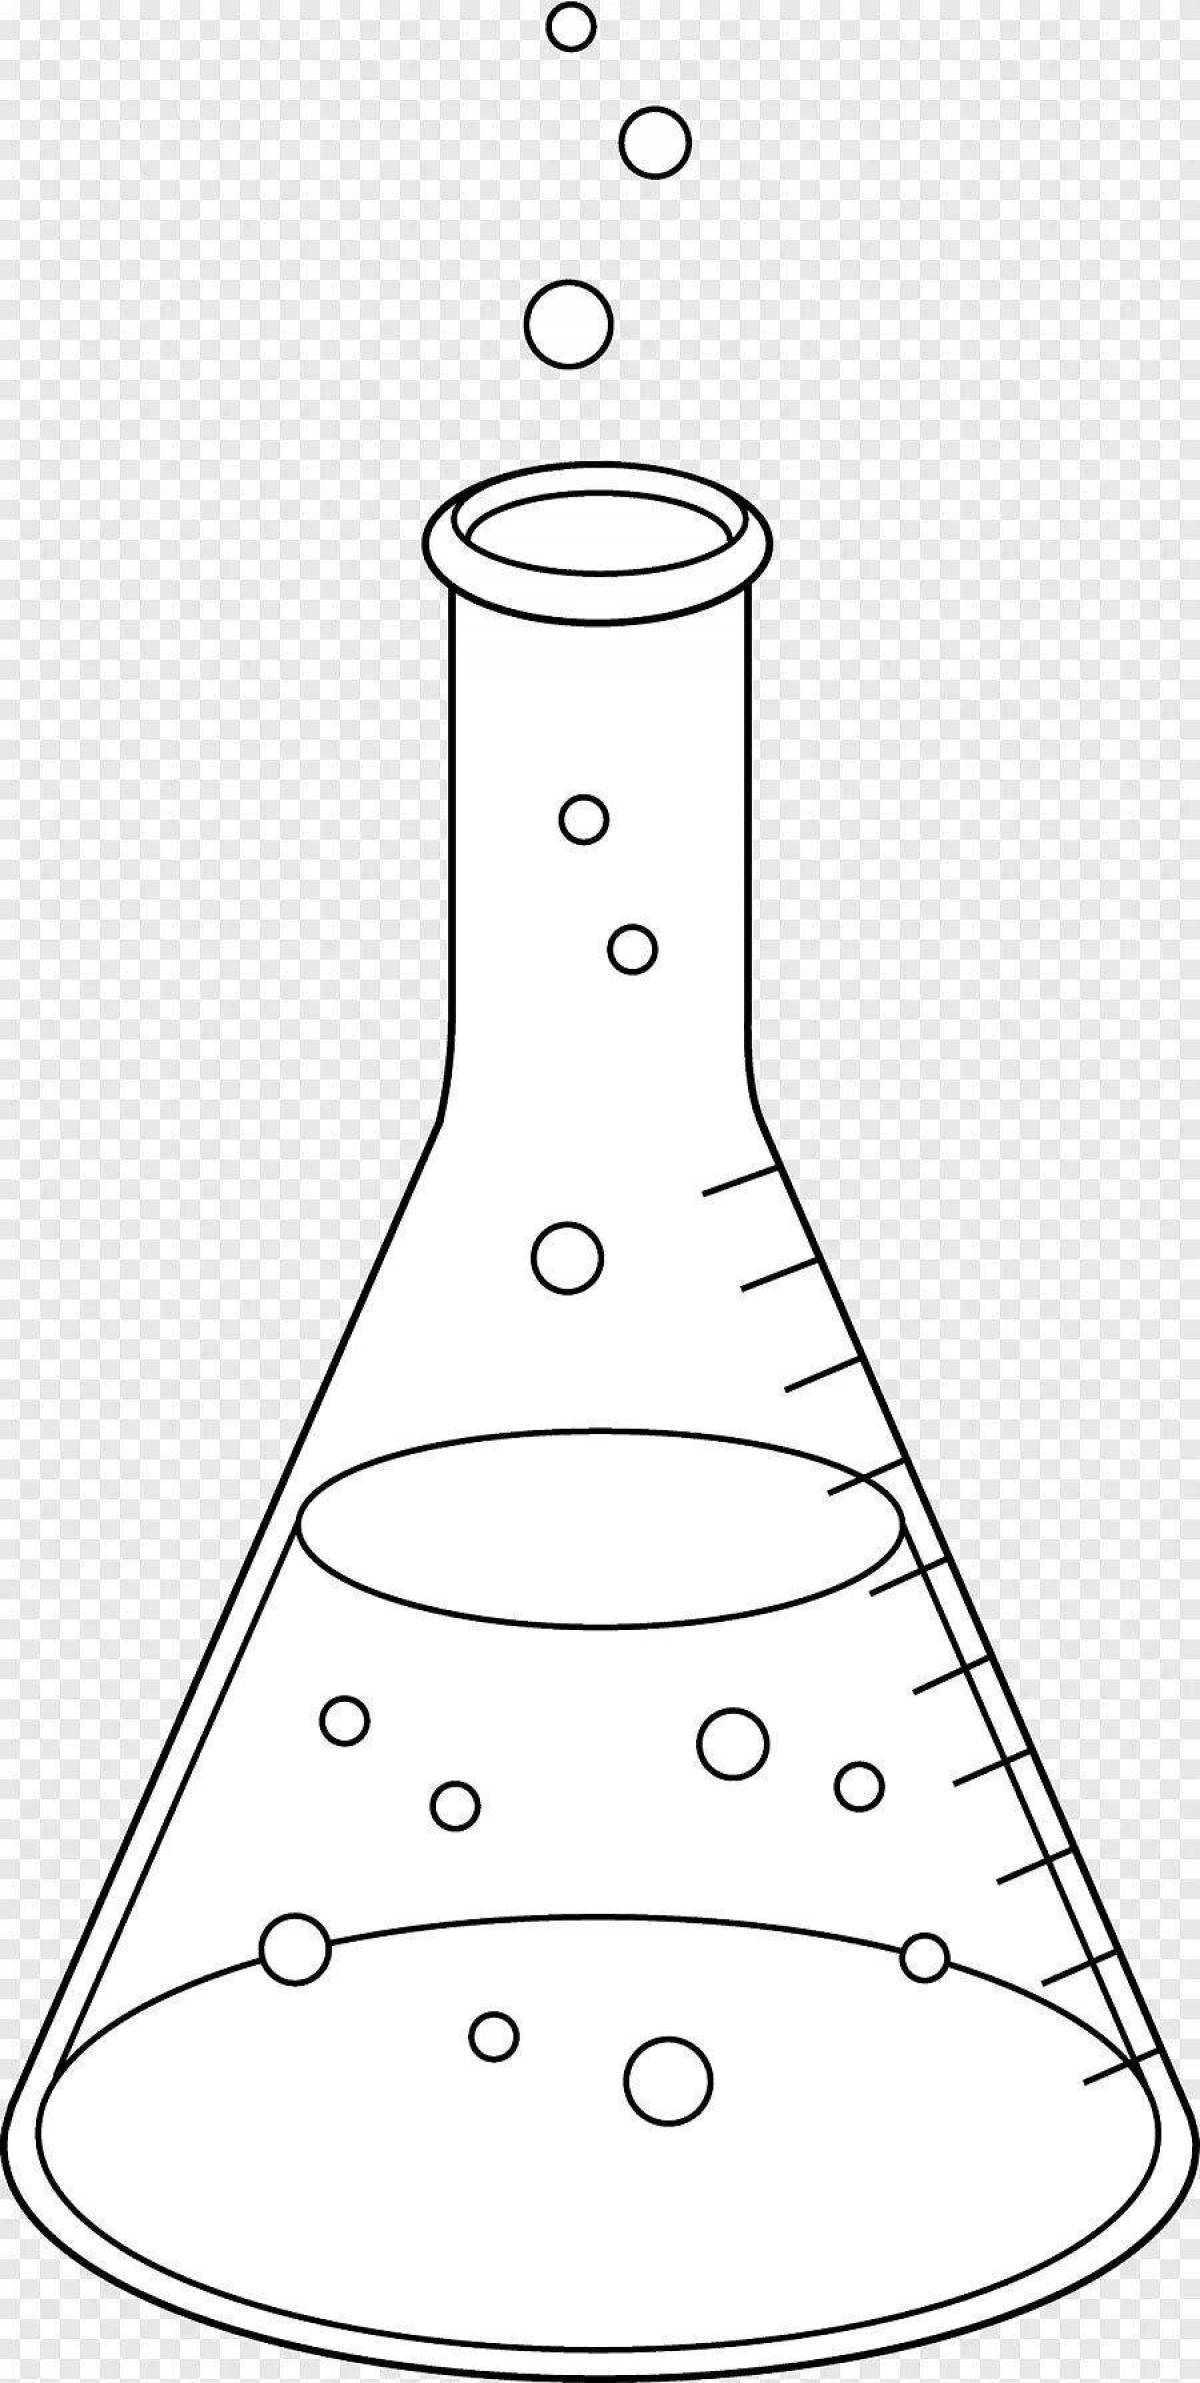 Coloring page adorable chemical flasks